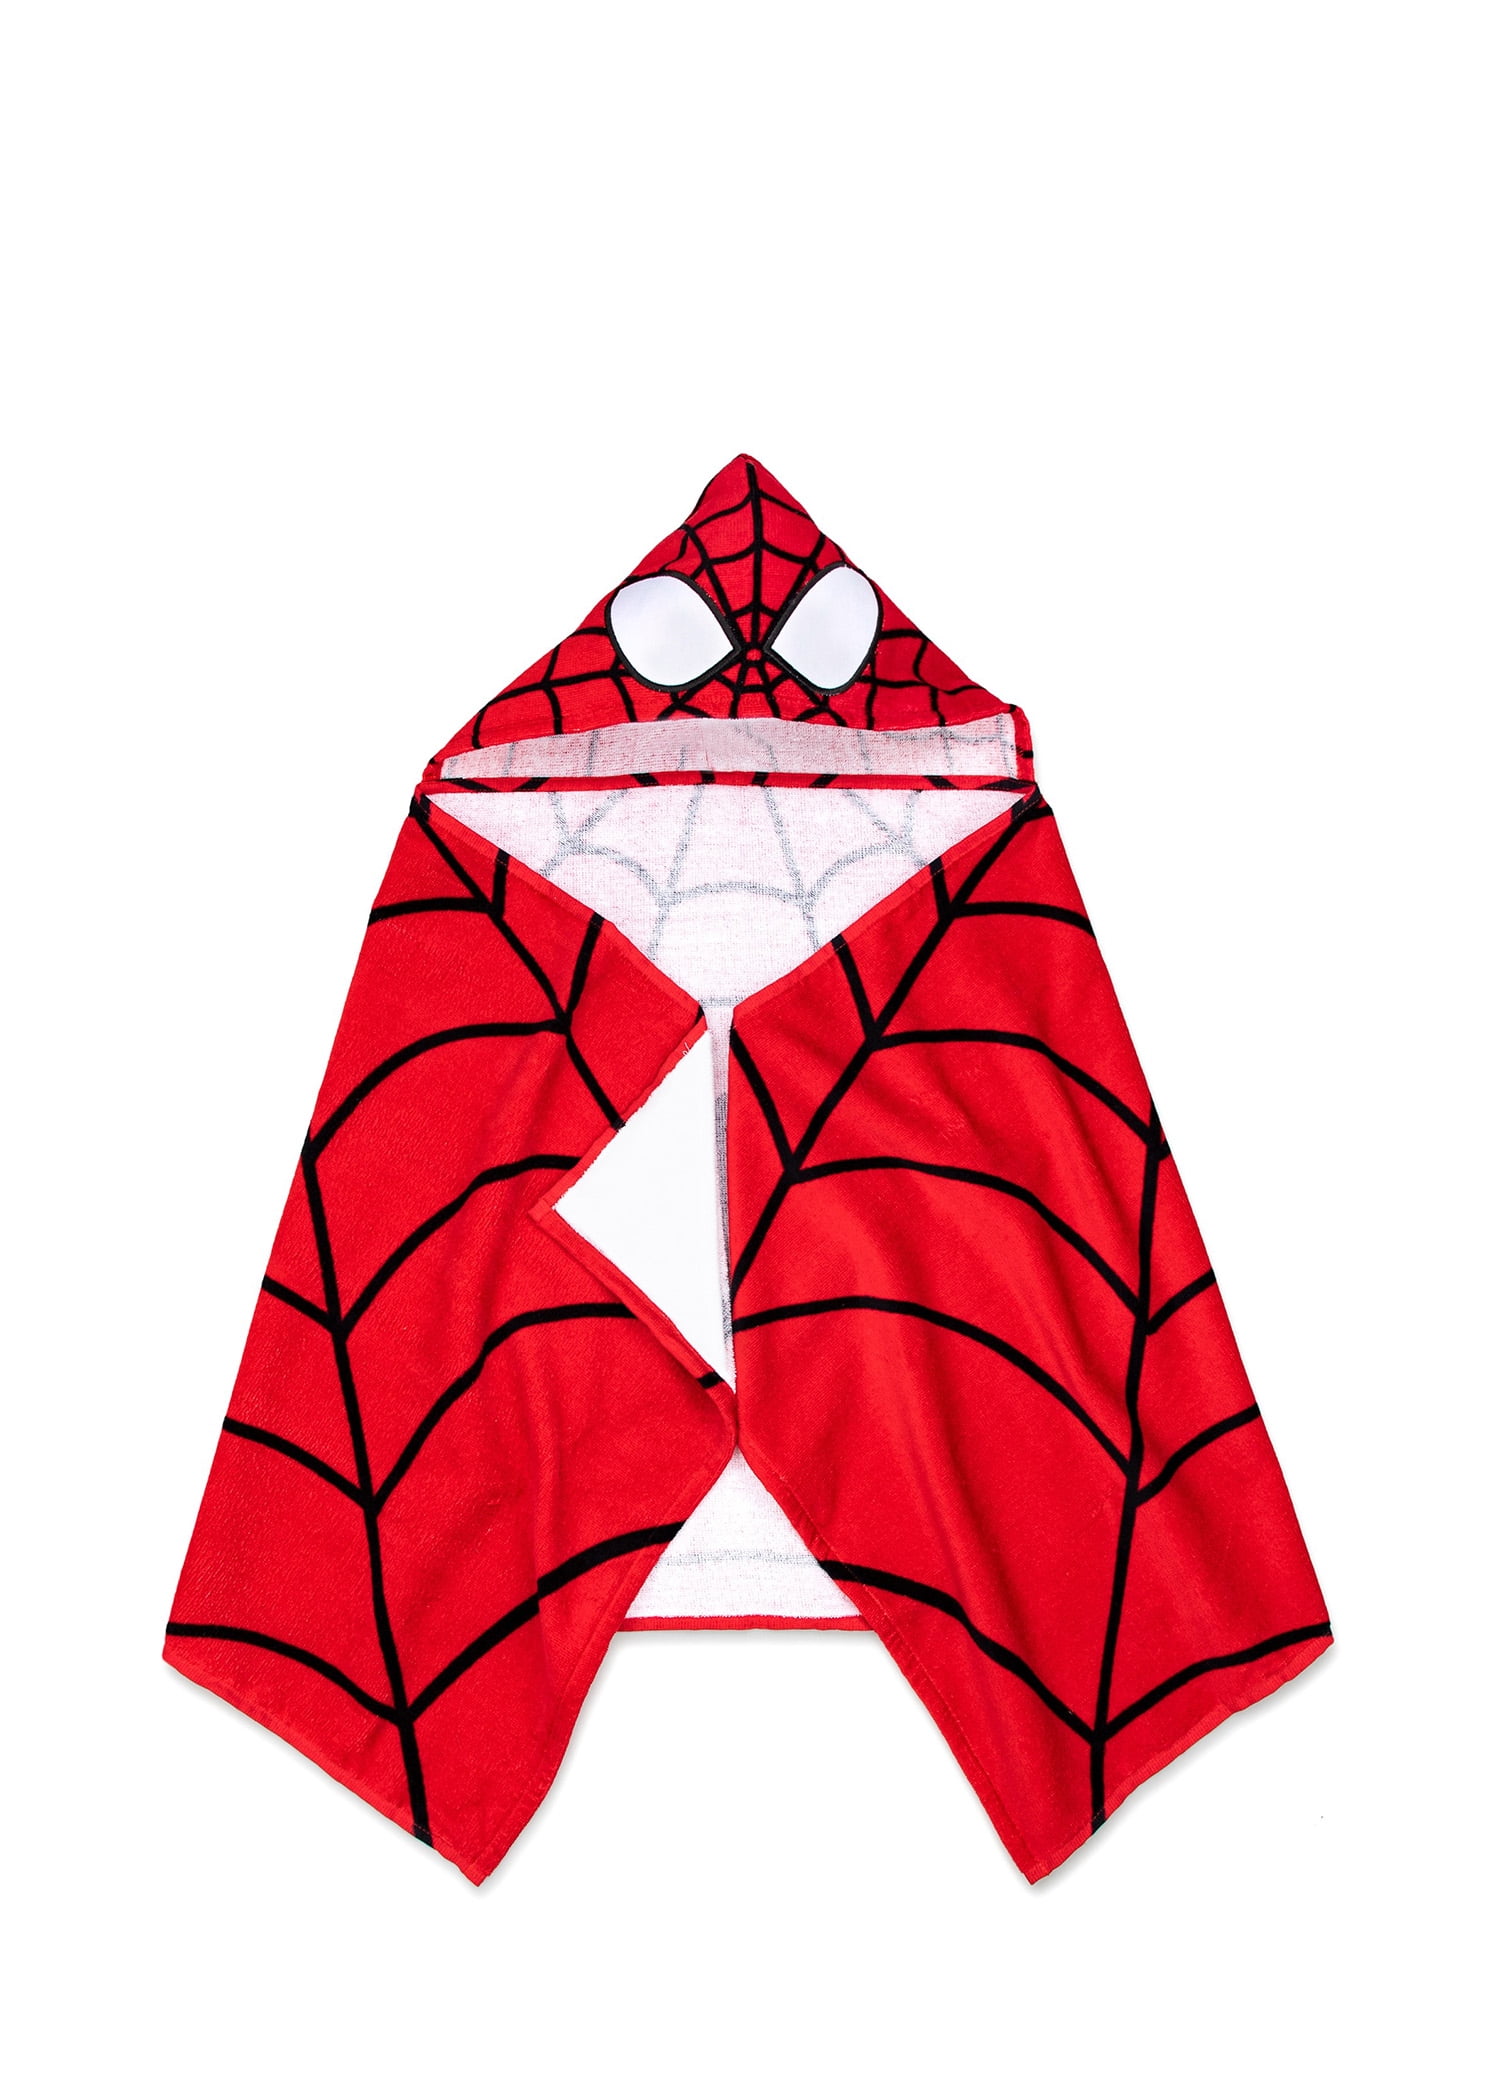 Spider-Man Kids Hooded Towel Wrap, 51 x 22, Cotton, Red, Marvel